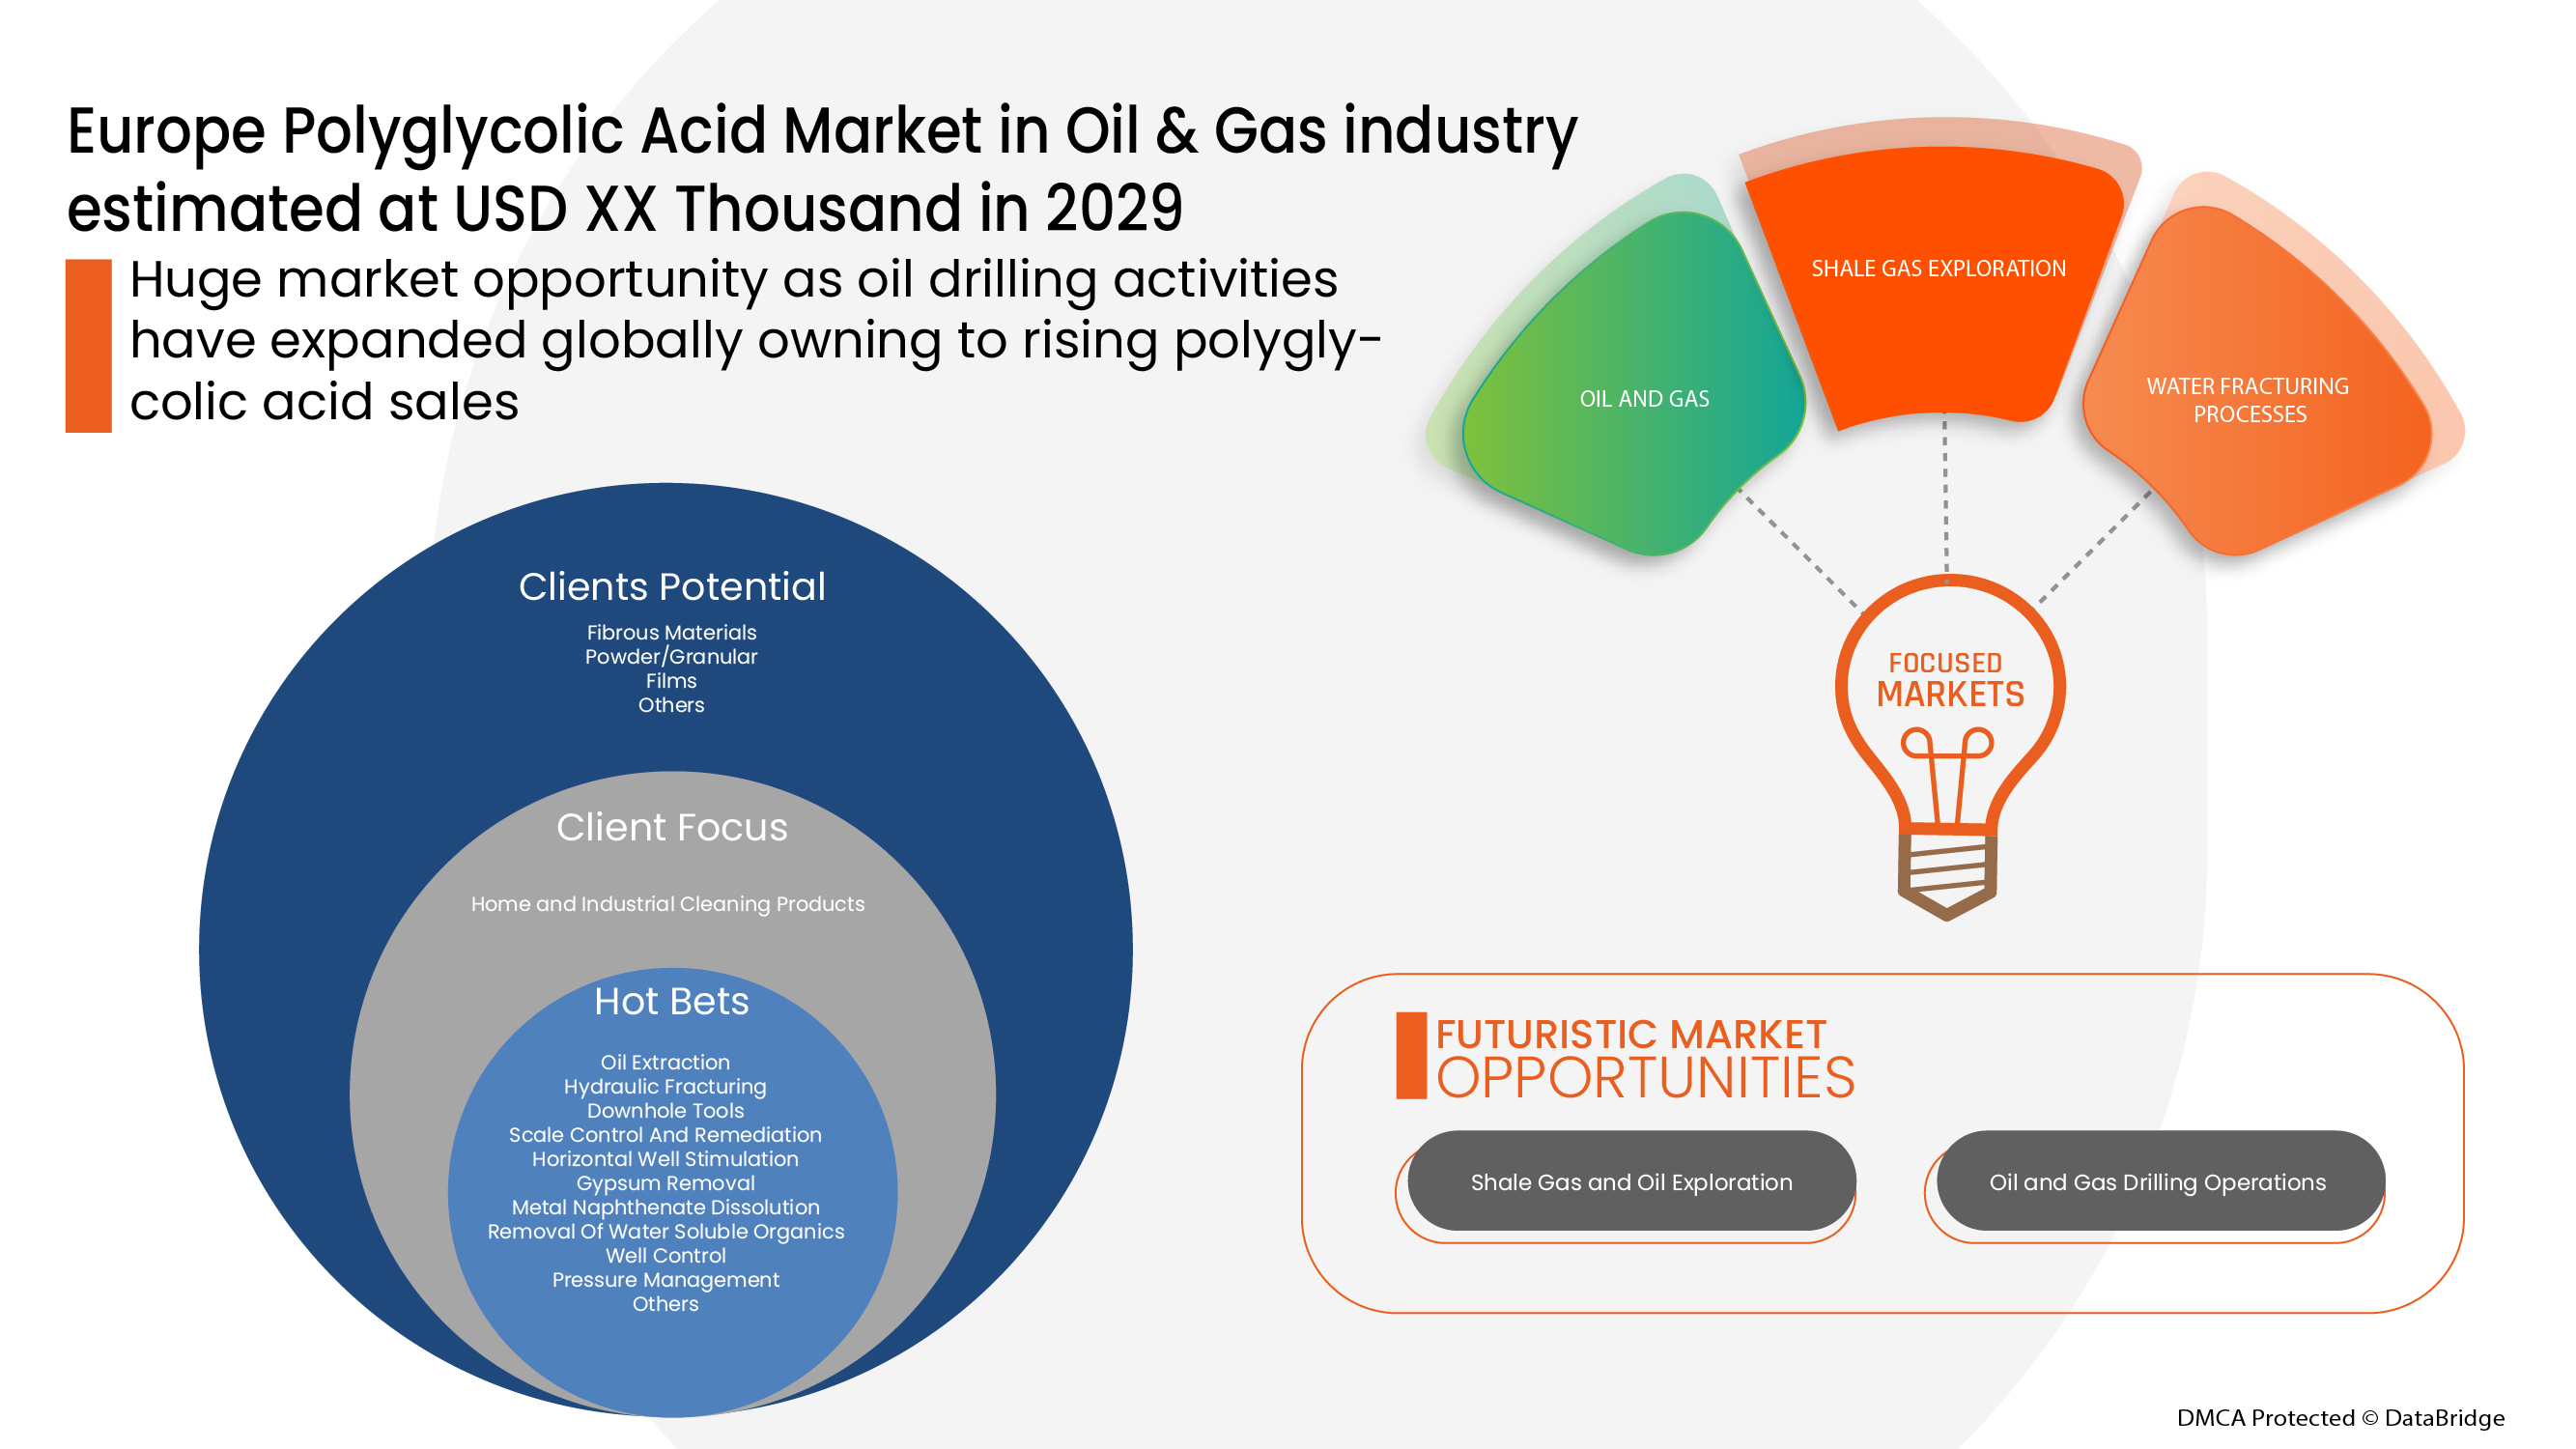 Europe Polyglycolic Acid Market in Oil and Gas industry